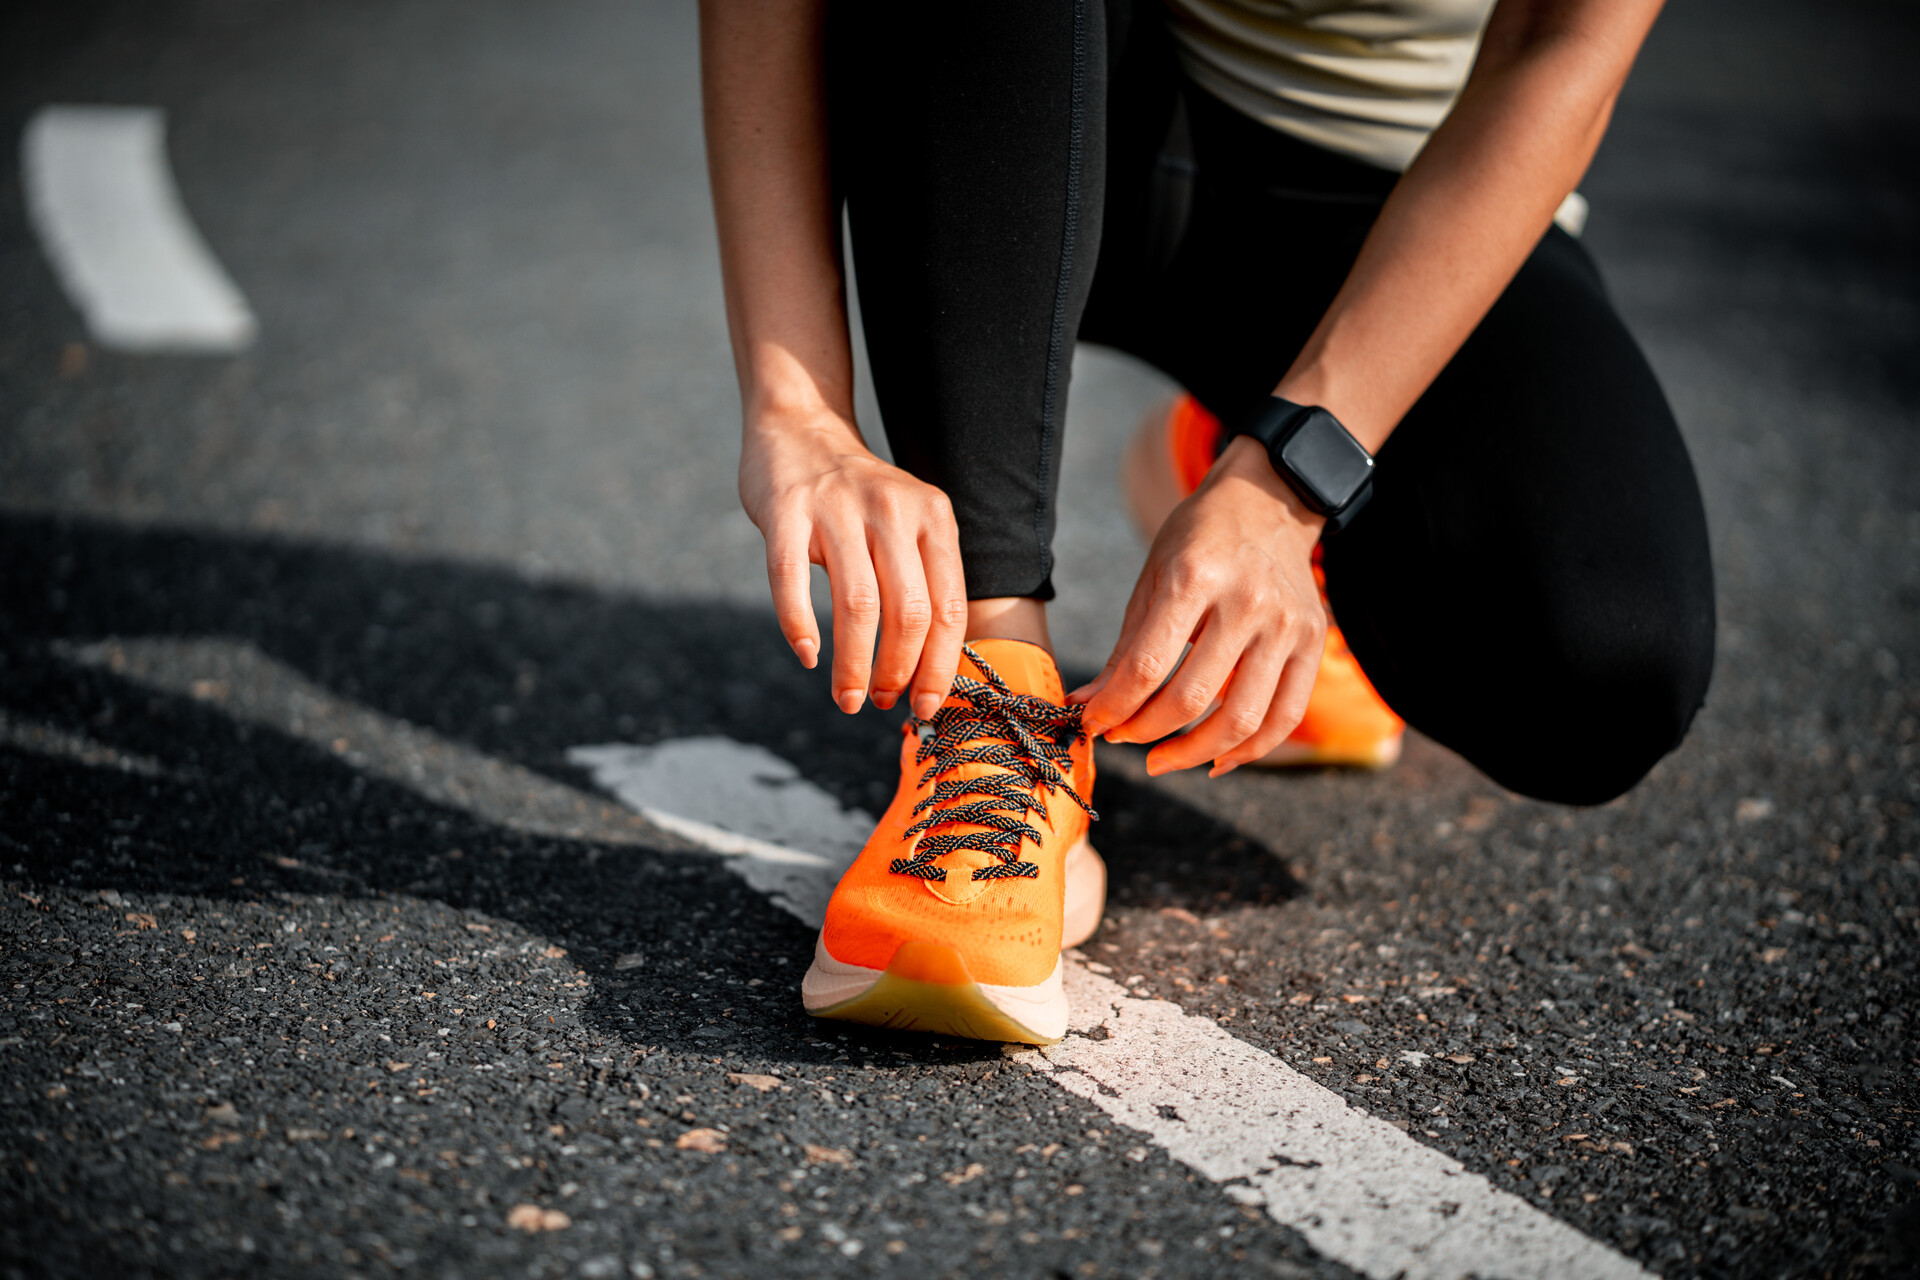 An image of a person with lighter skin crouching with one knee bent to tie the laces of their neon orange running shoes. We can't see their face.